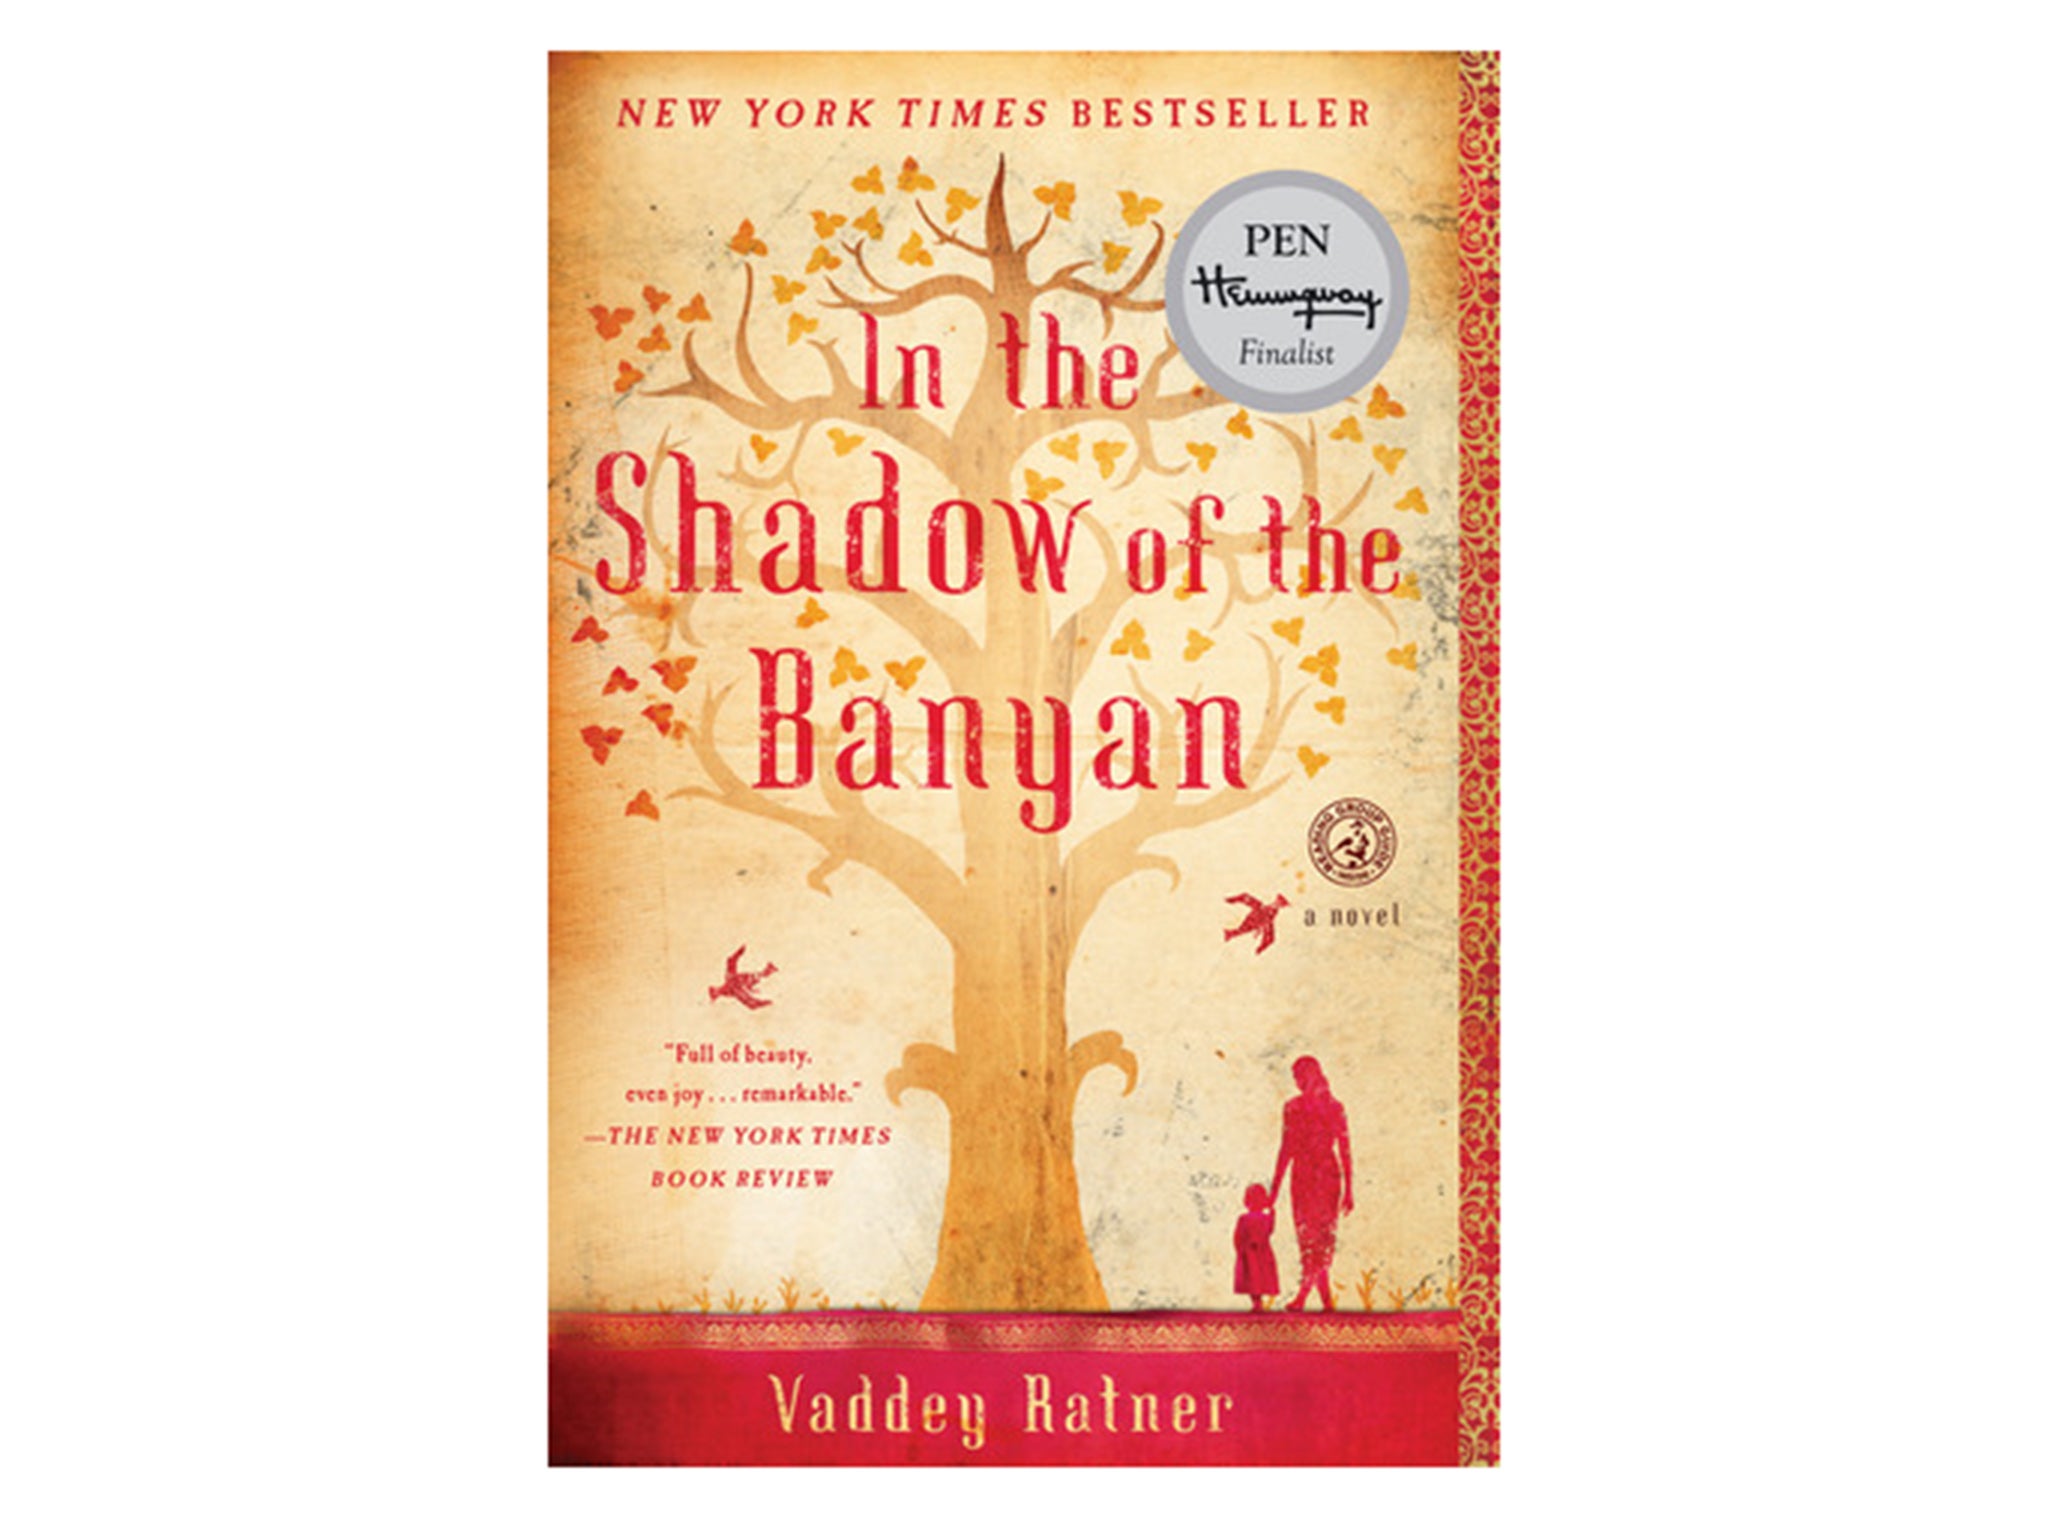 in-the-shadow-of-the-banyan-indybest-holocaust